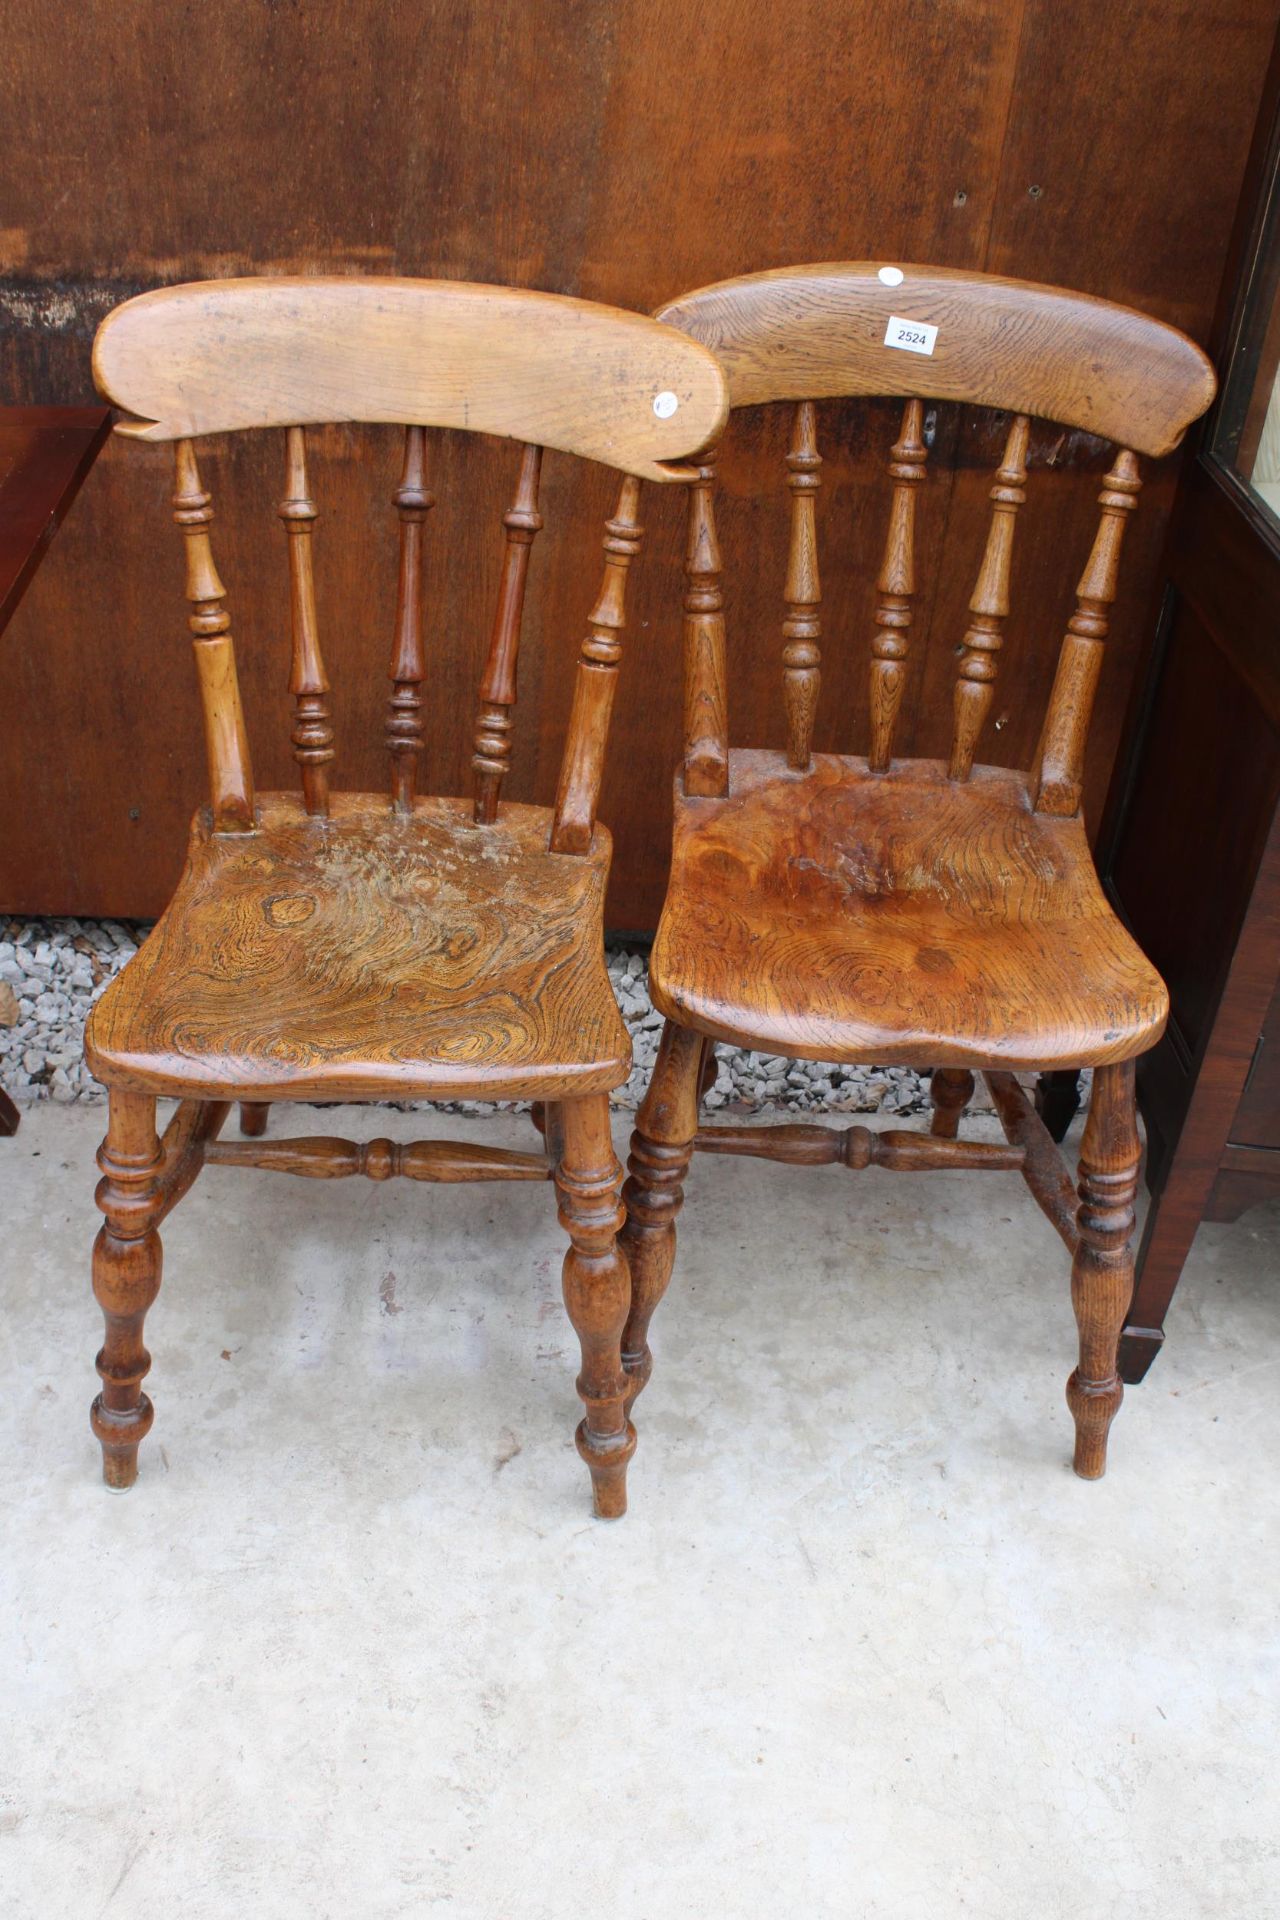 TWO VICTORIAN ELM KITCHEN CHAIRS WITH TURNED LEGS AND UPRIGHTS